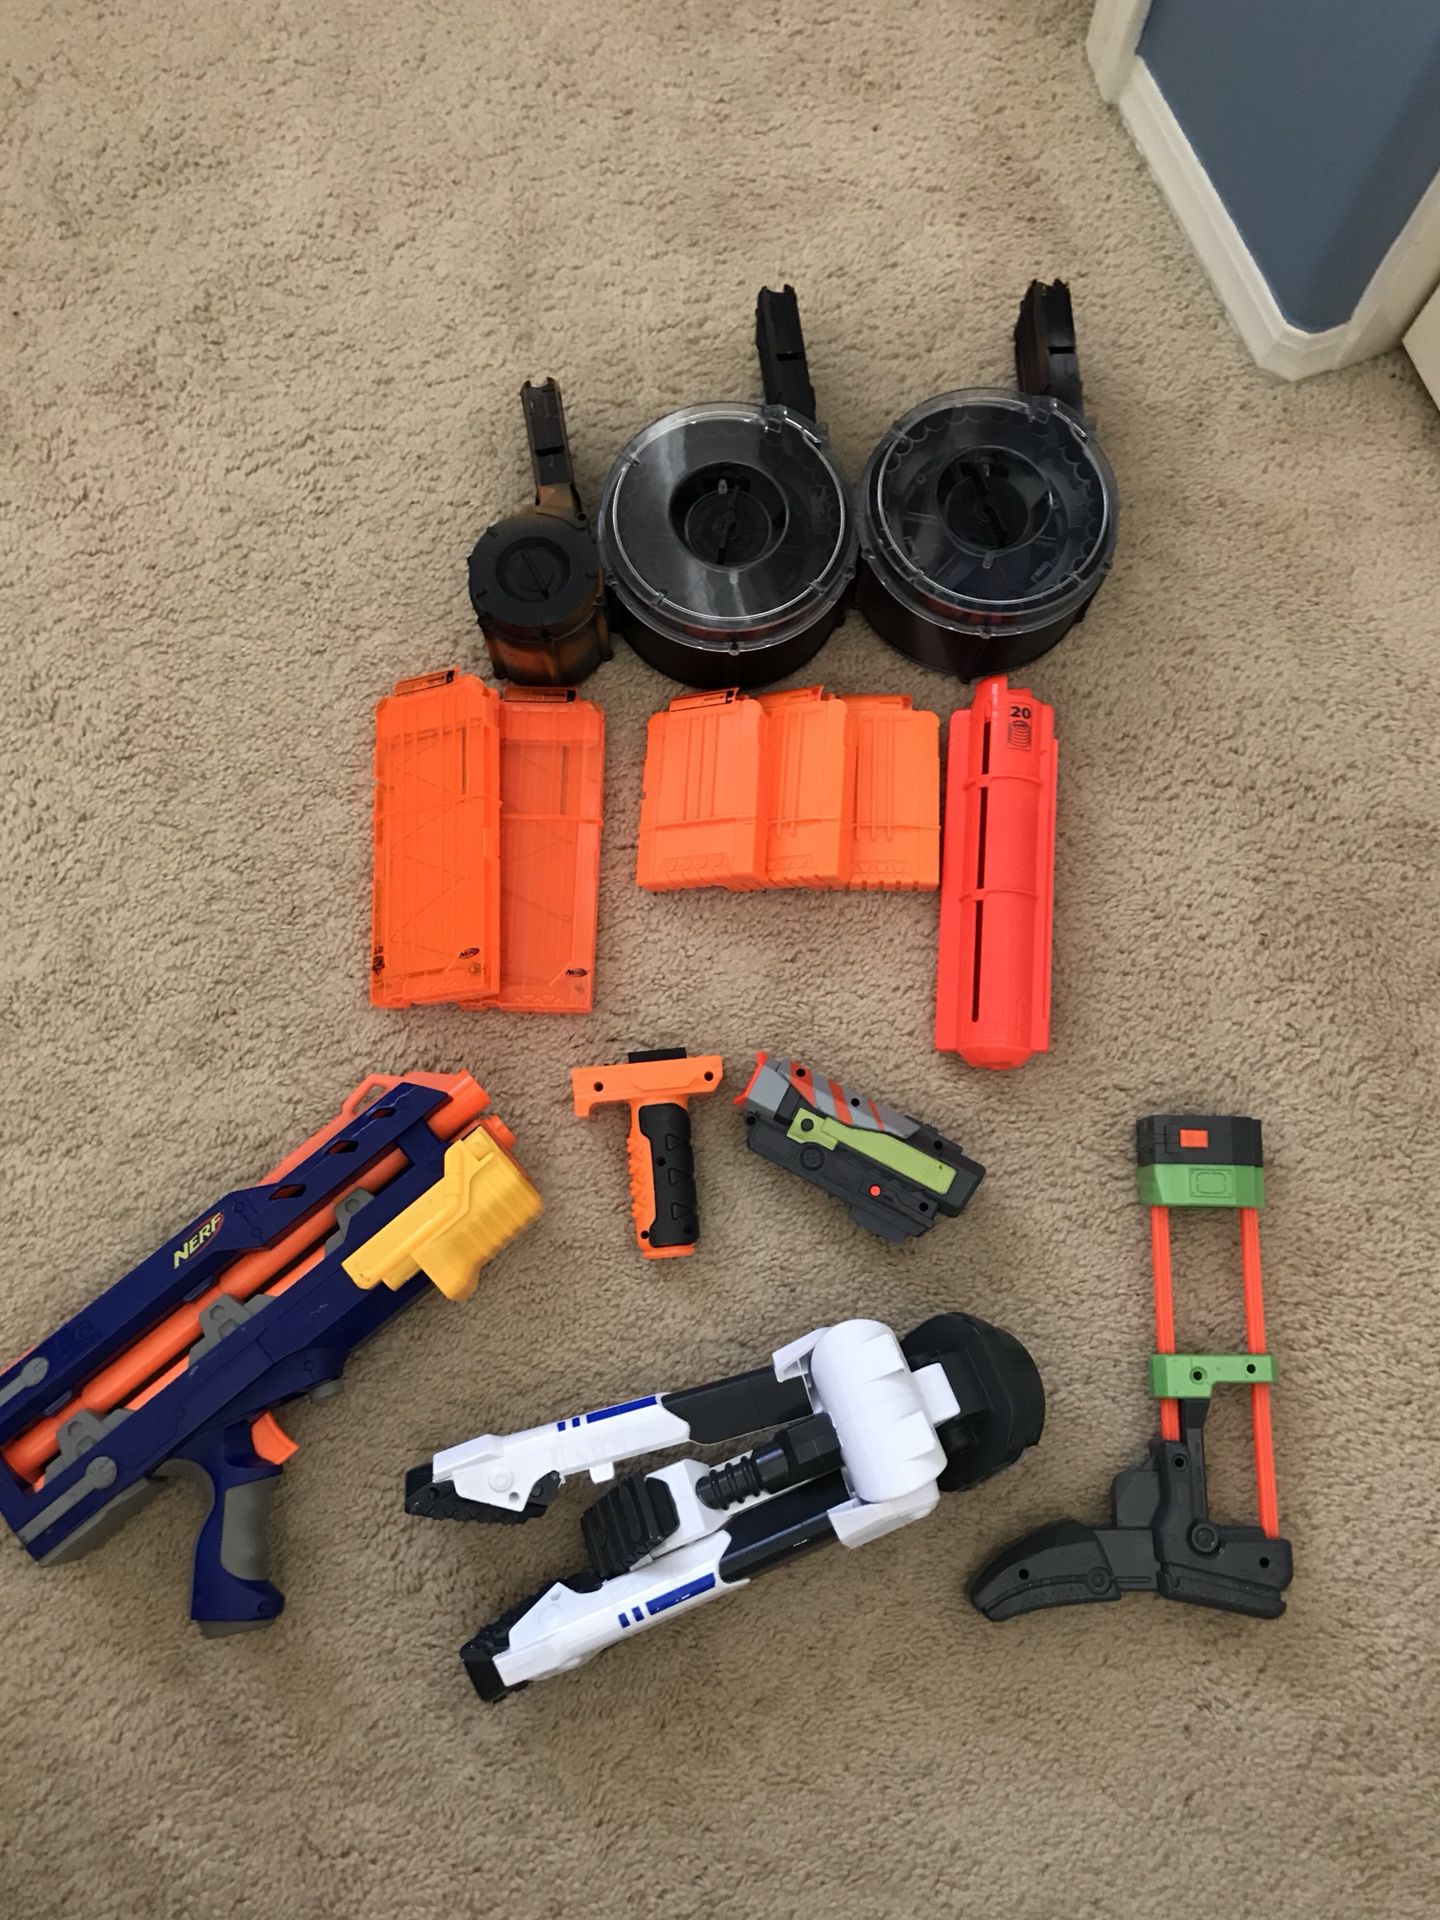 Nerf gun accessories/ mags-attachments for in Corona, CA - OfferUp